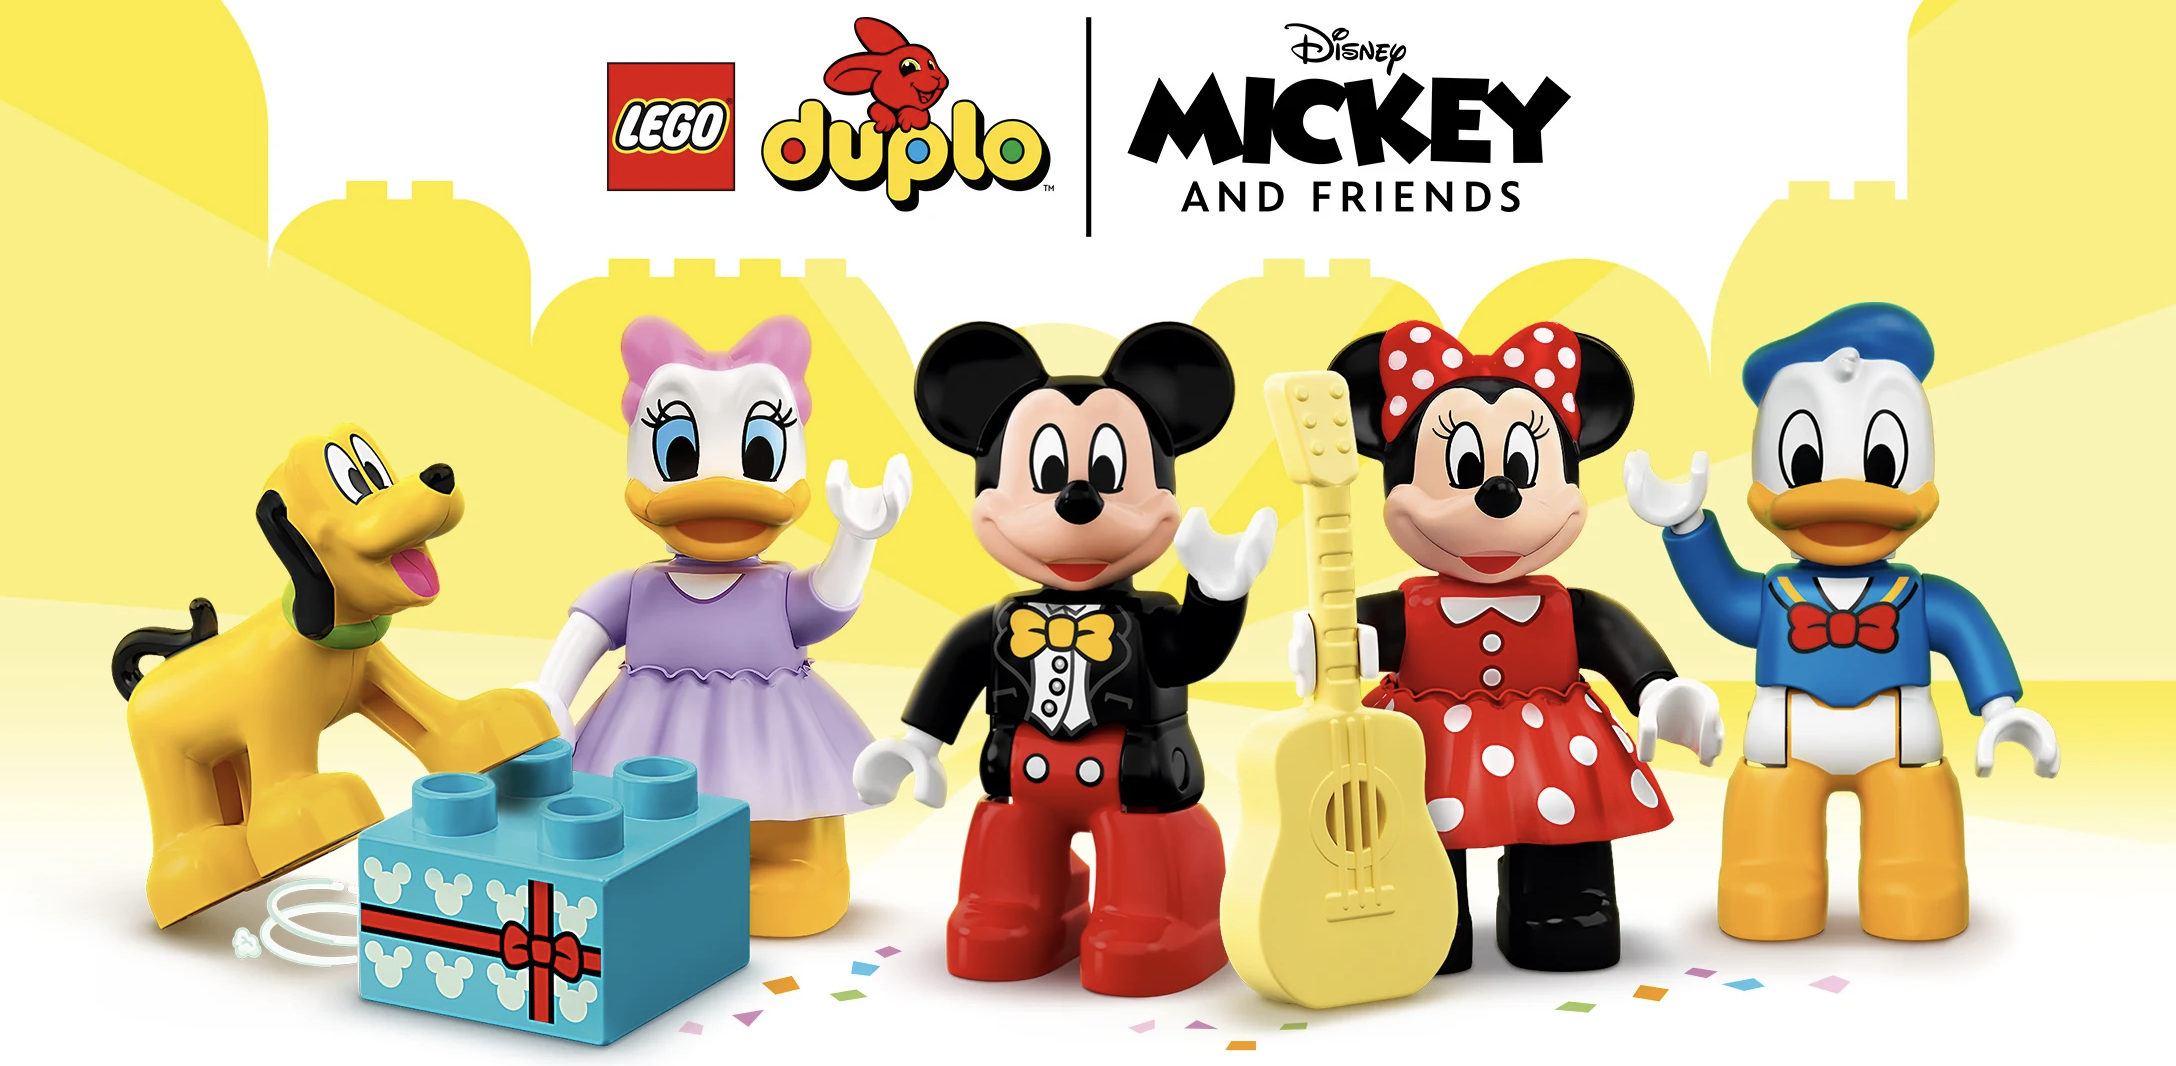 LEGO® DUPLO Mickey and Friend mobile app is now available to in your Google Play and App Store.